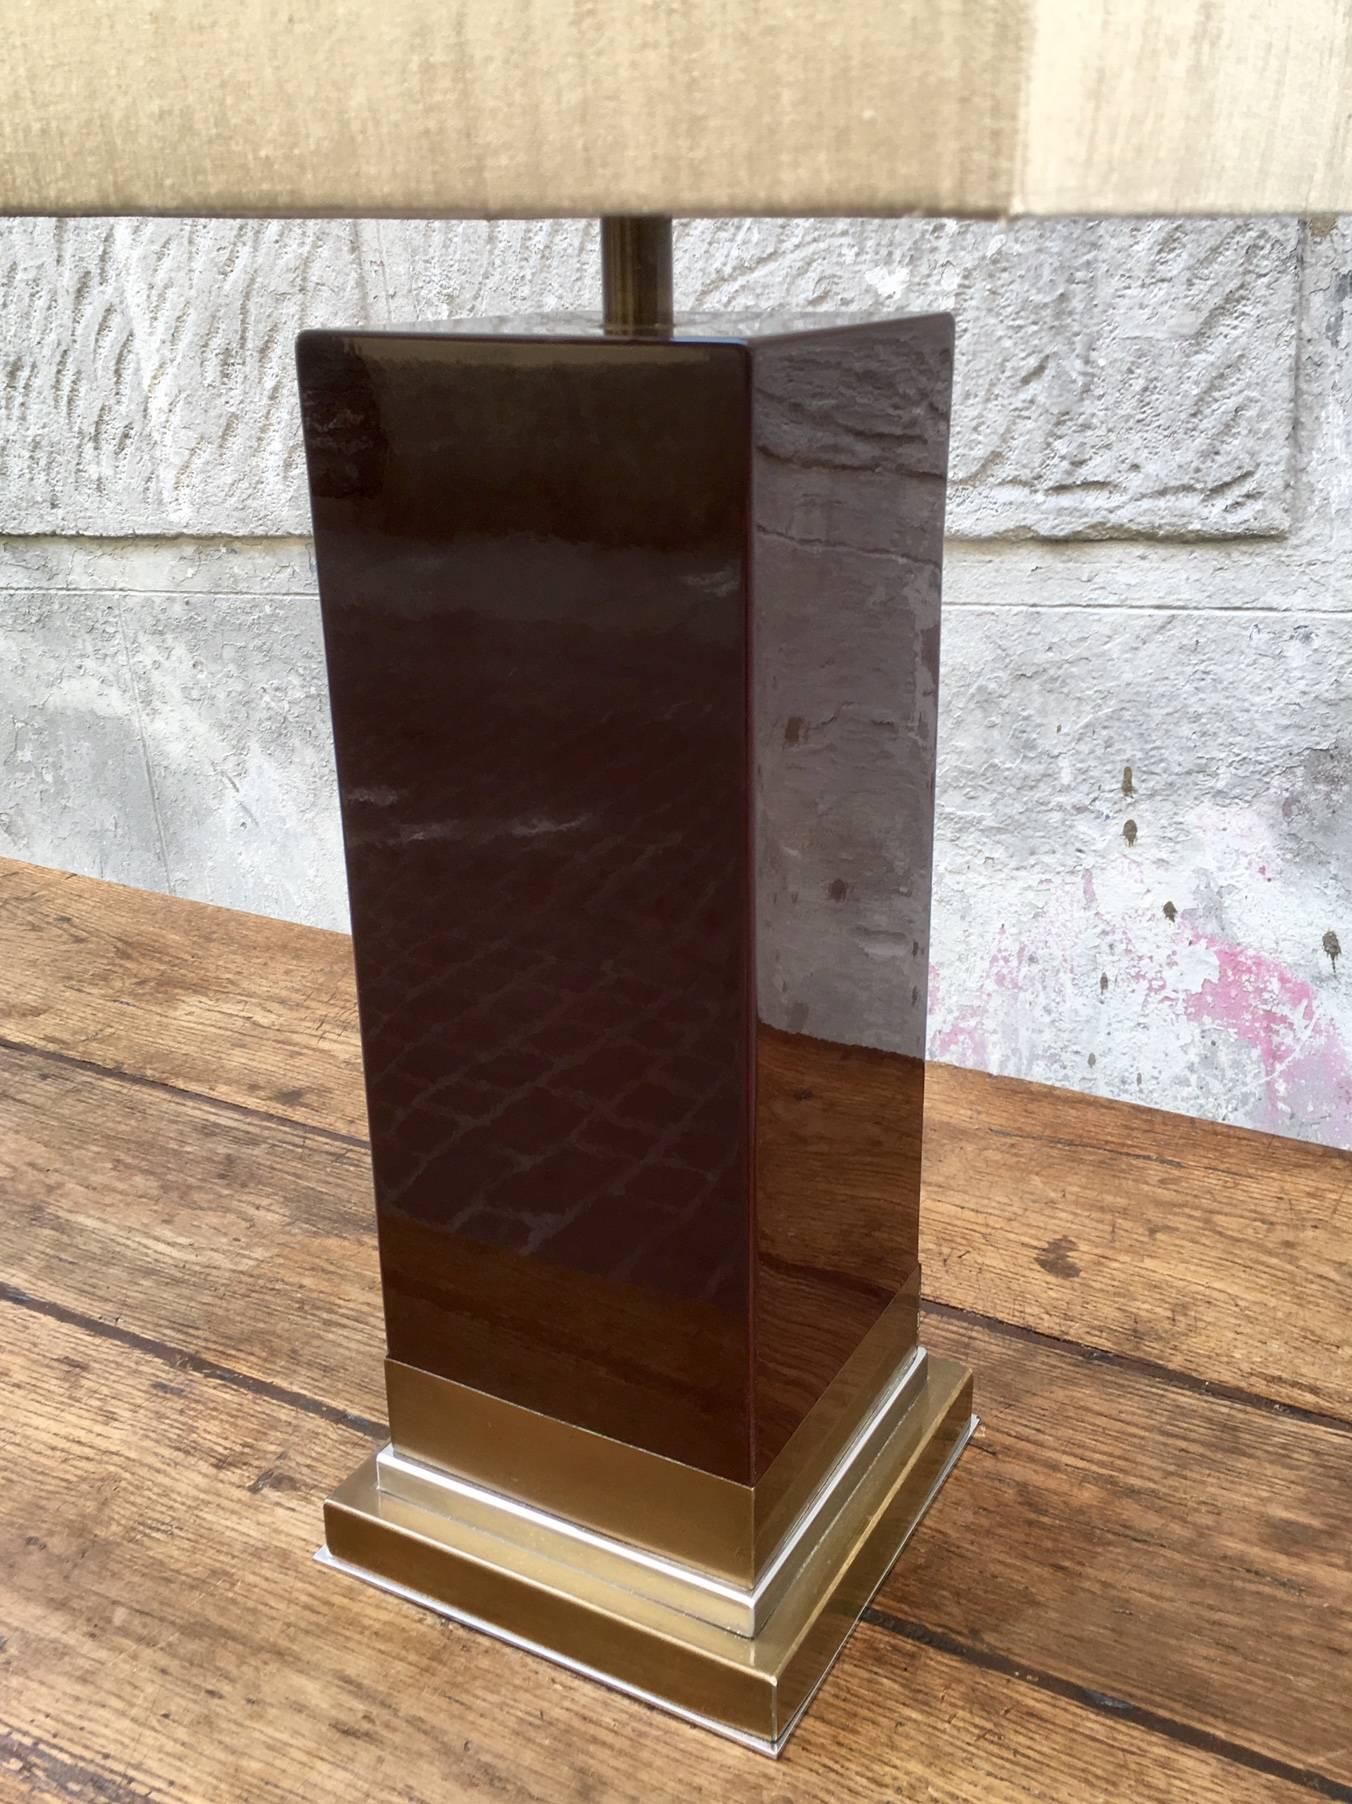 1970 French dark maroon lacquered table lamp, gold-plated brass finishing stepped base. Signed J.C. Mahey.
The measures with shade is 86 cm H X 38 D X 38 W.